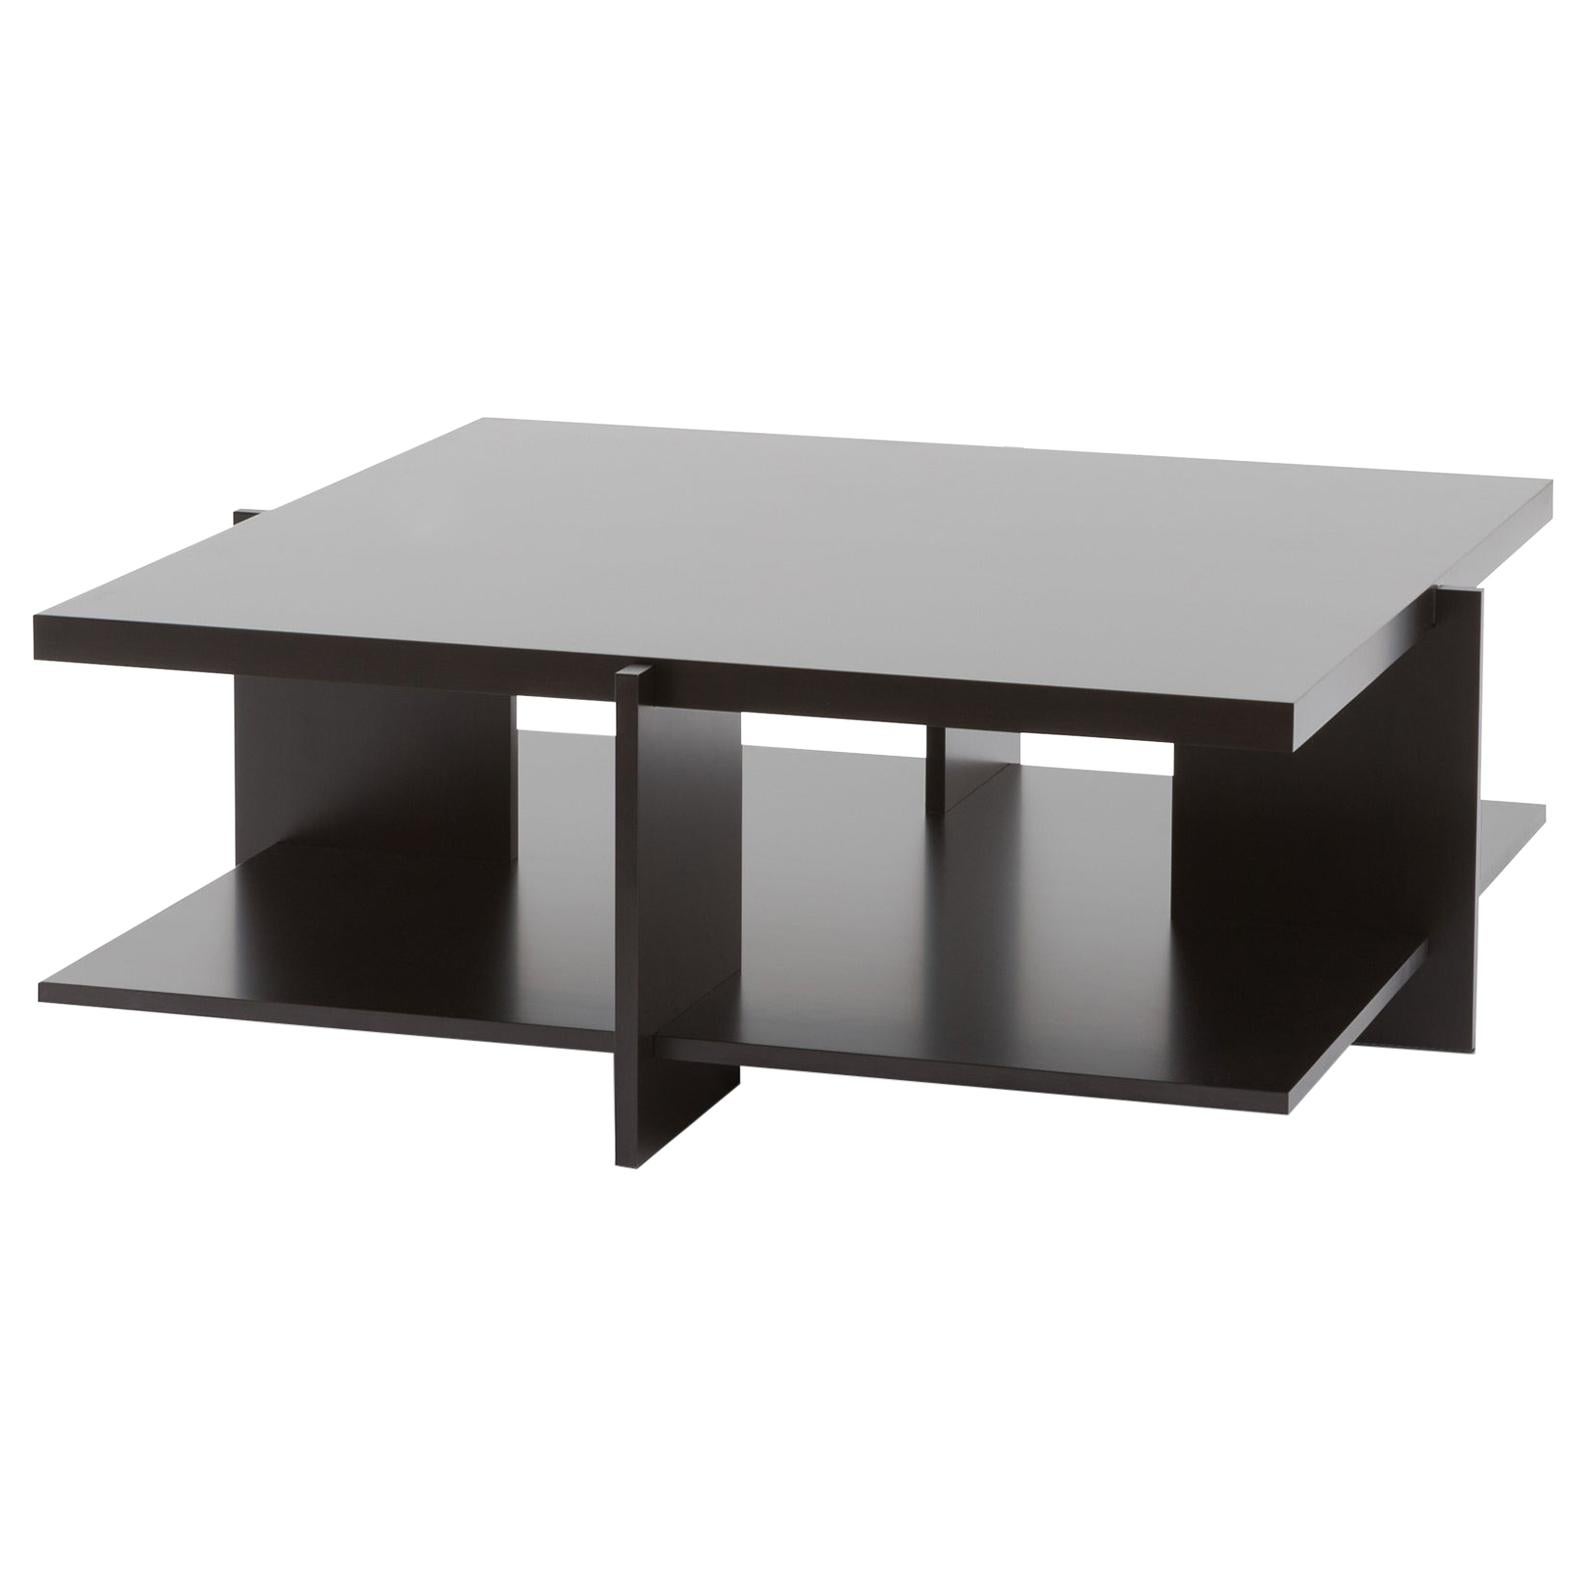 Frank Lloyd Wrigh Large Lewis Coffee Table by Cassina